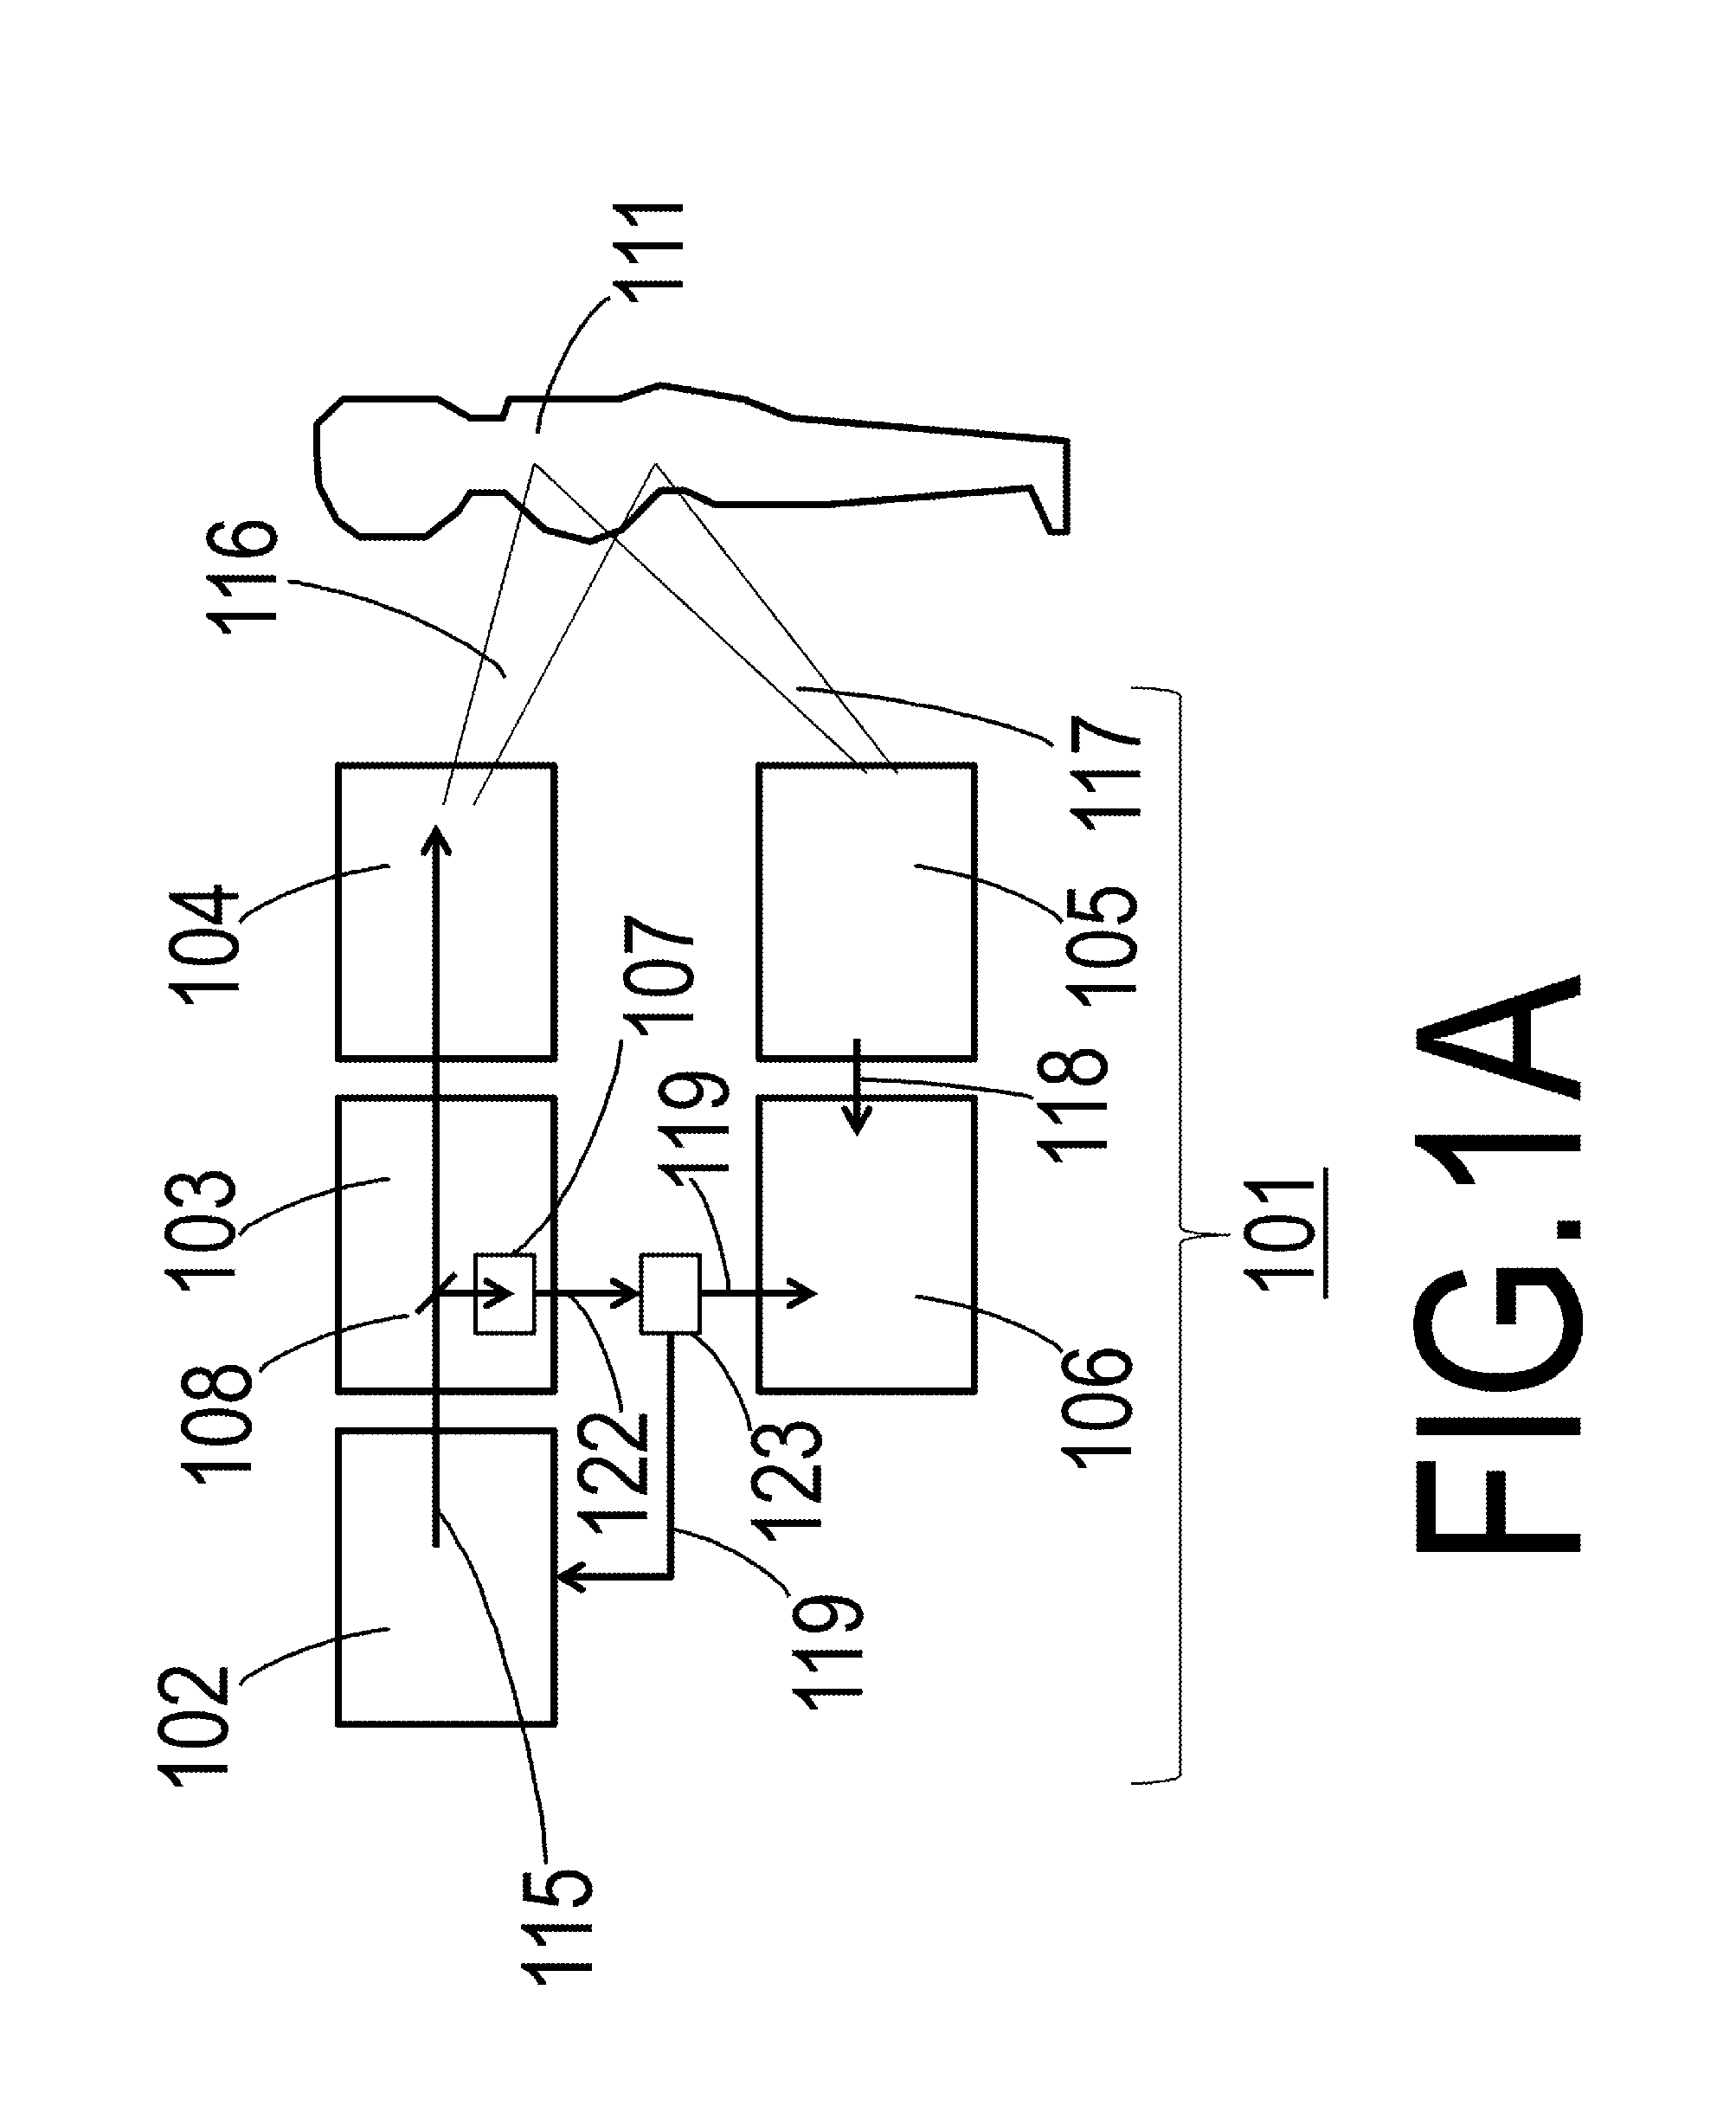 Object information acquiring apparatus and laser apparatus used therein